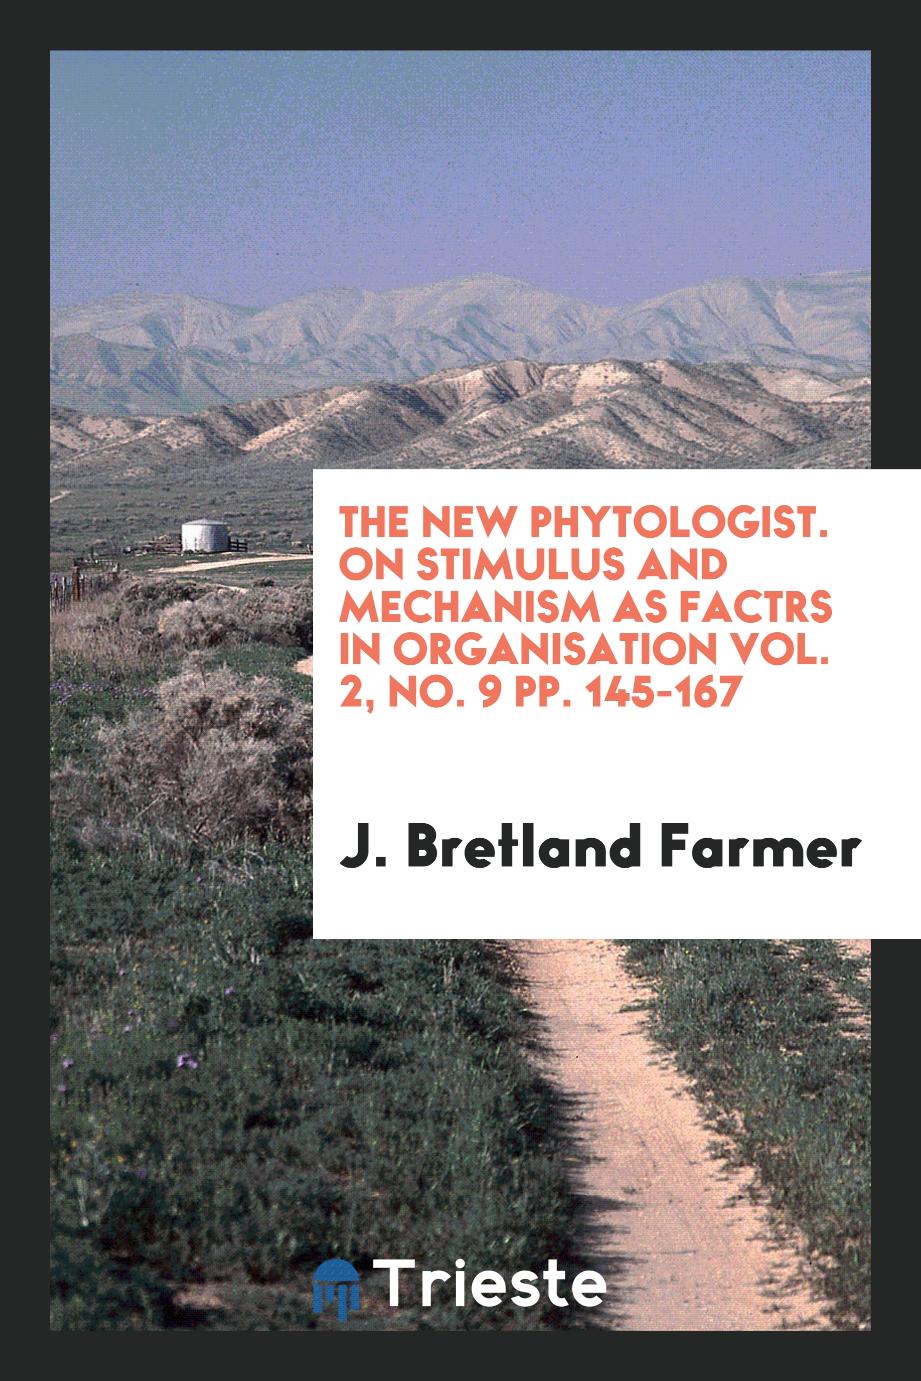 The new phytologist. On stimulus and mechanism as factrs in organisation Vol. 2, No. 9 pp. 145-167